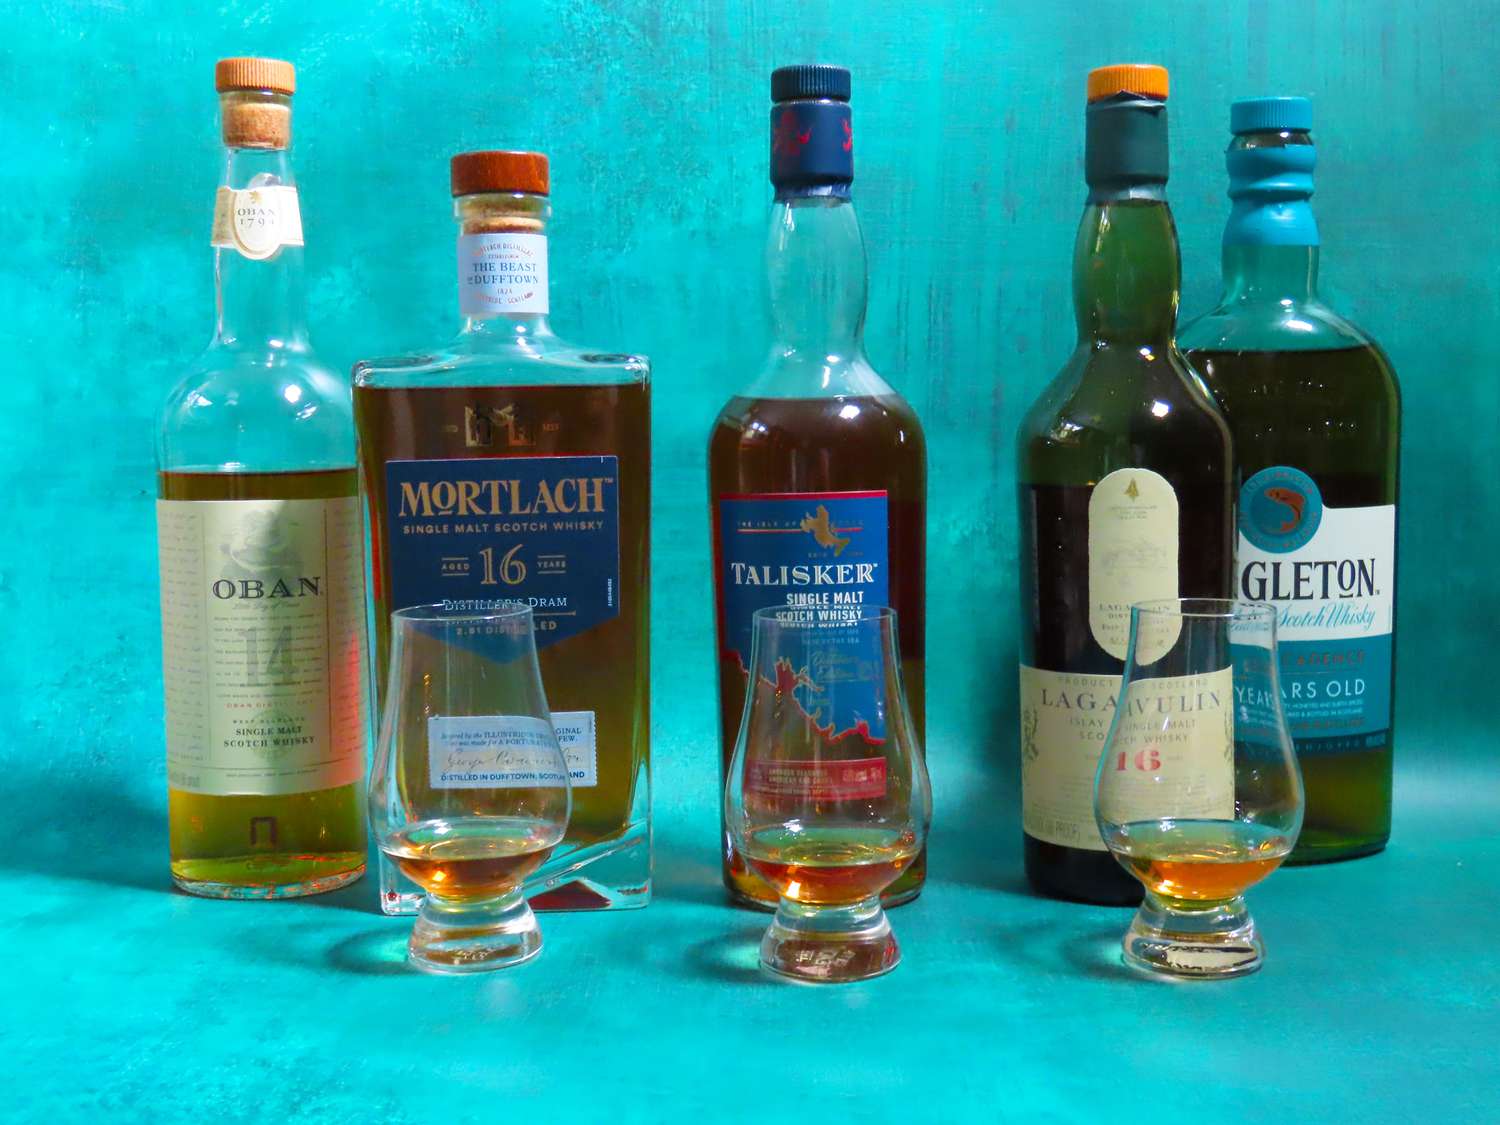 multiple bottles of whisky and whisky tasting glasses on a blue surface